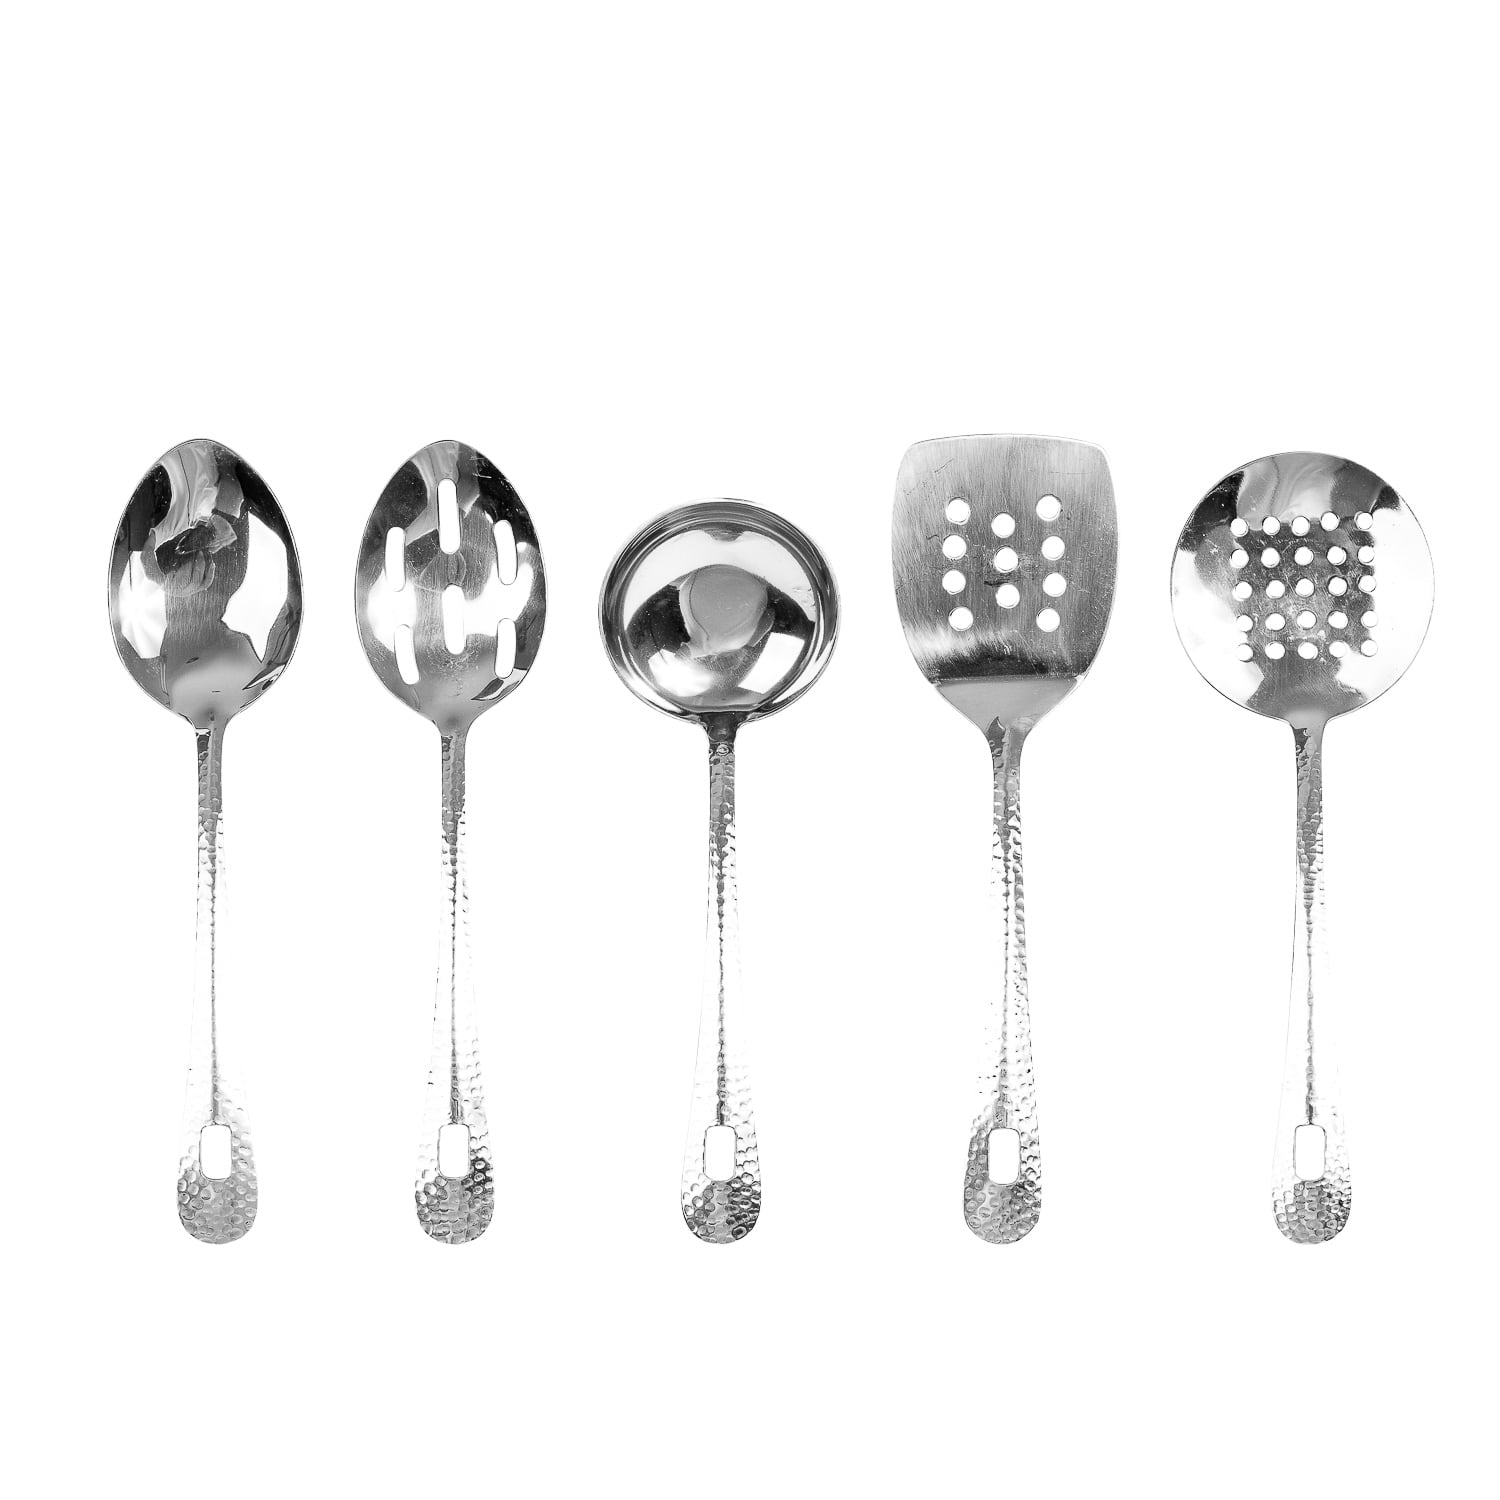 Stainless Steel Kitchen tools Utensil Set, Standcn 9 PCS Cooking Utensils  NEW23